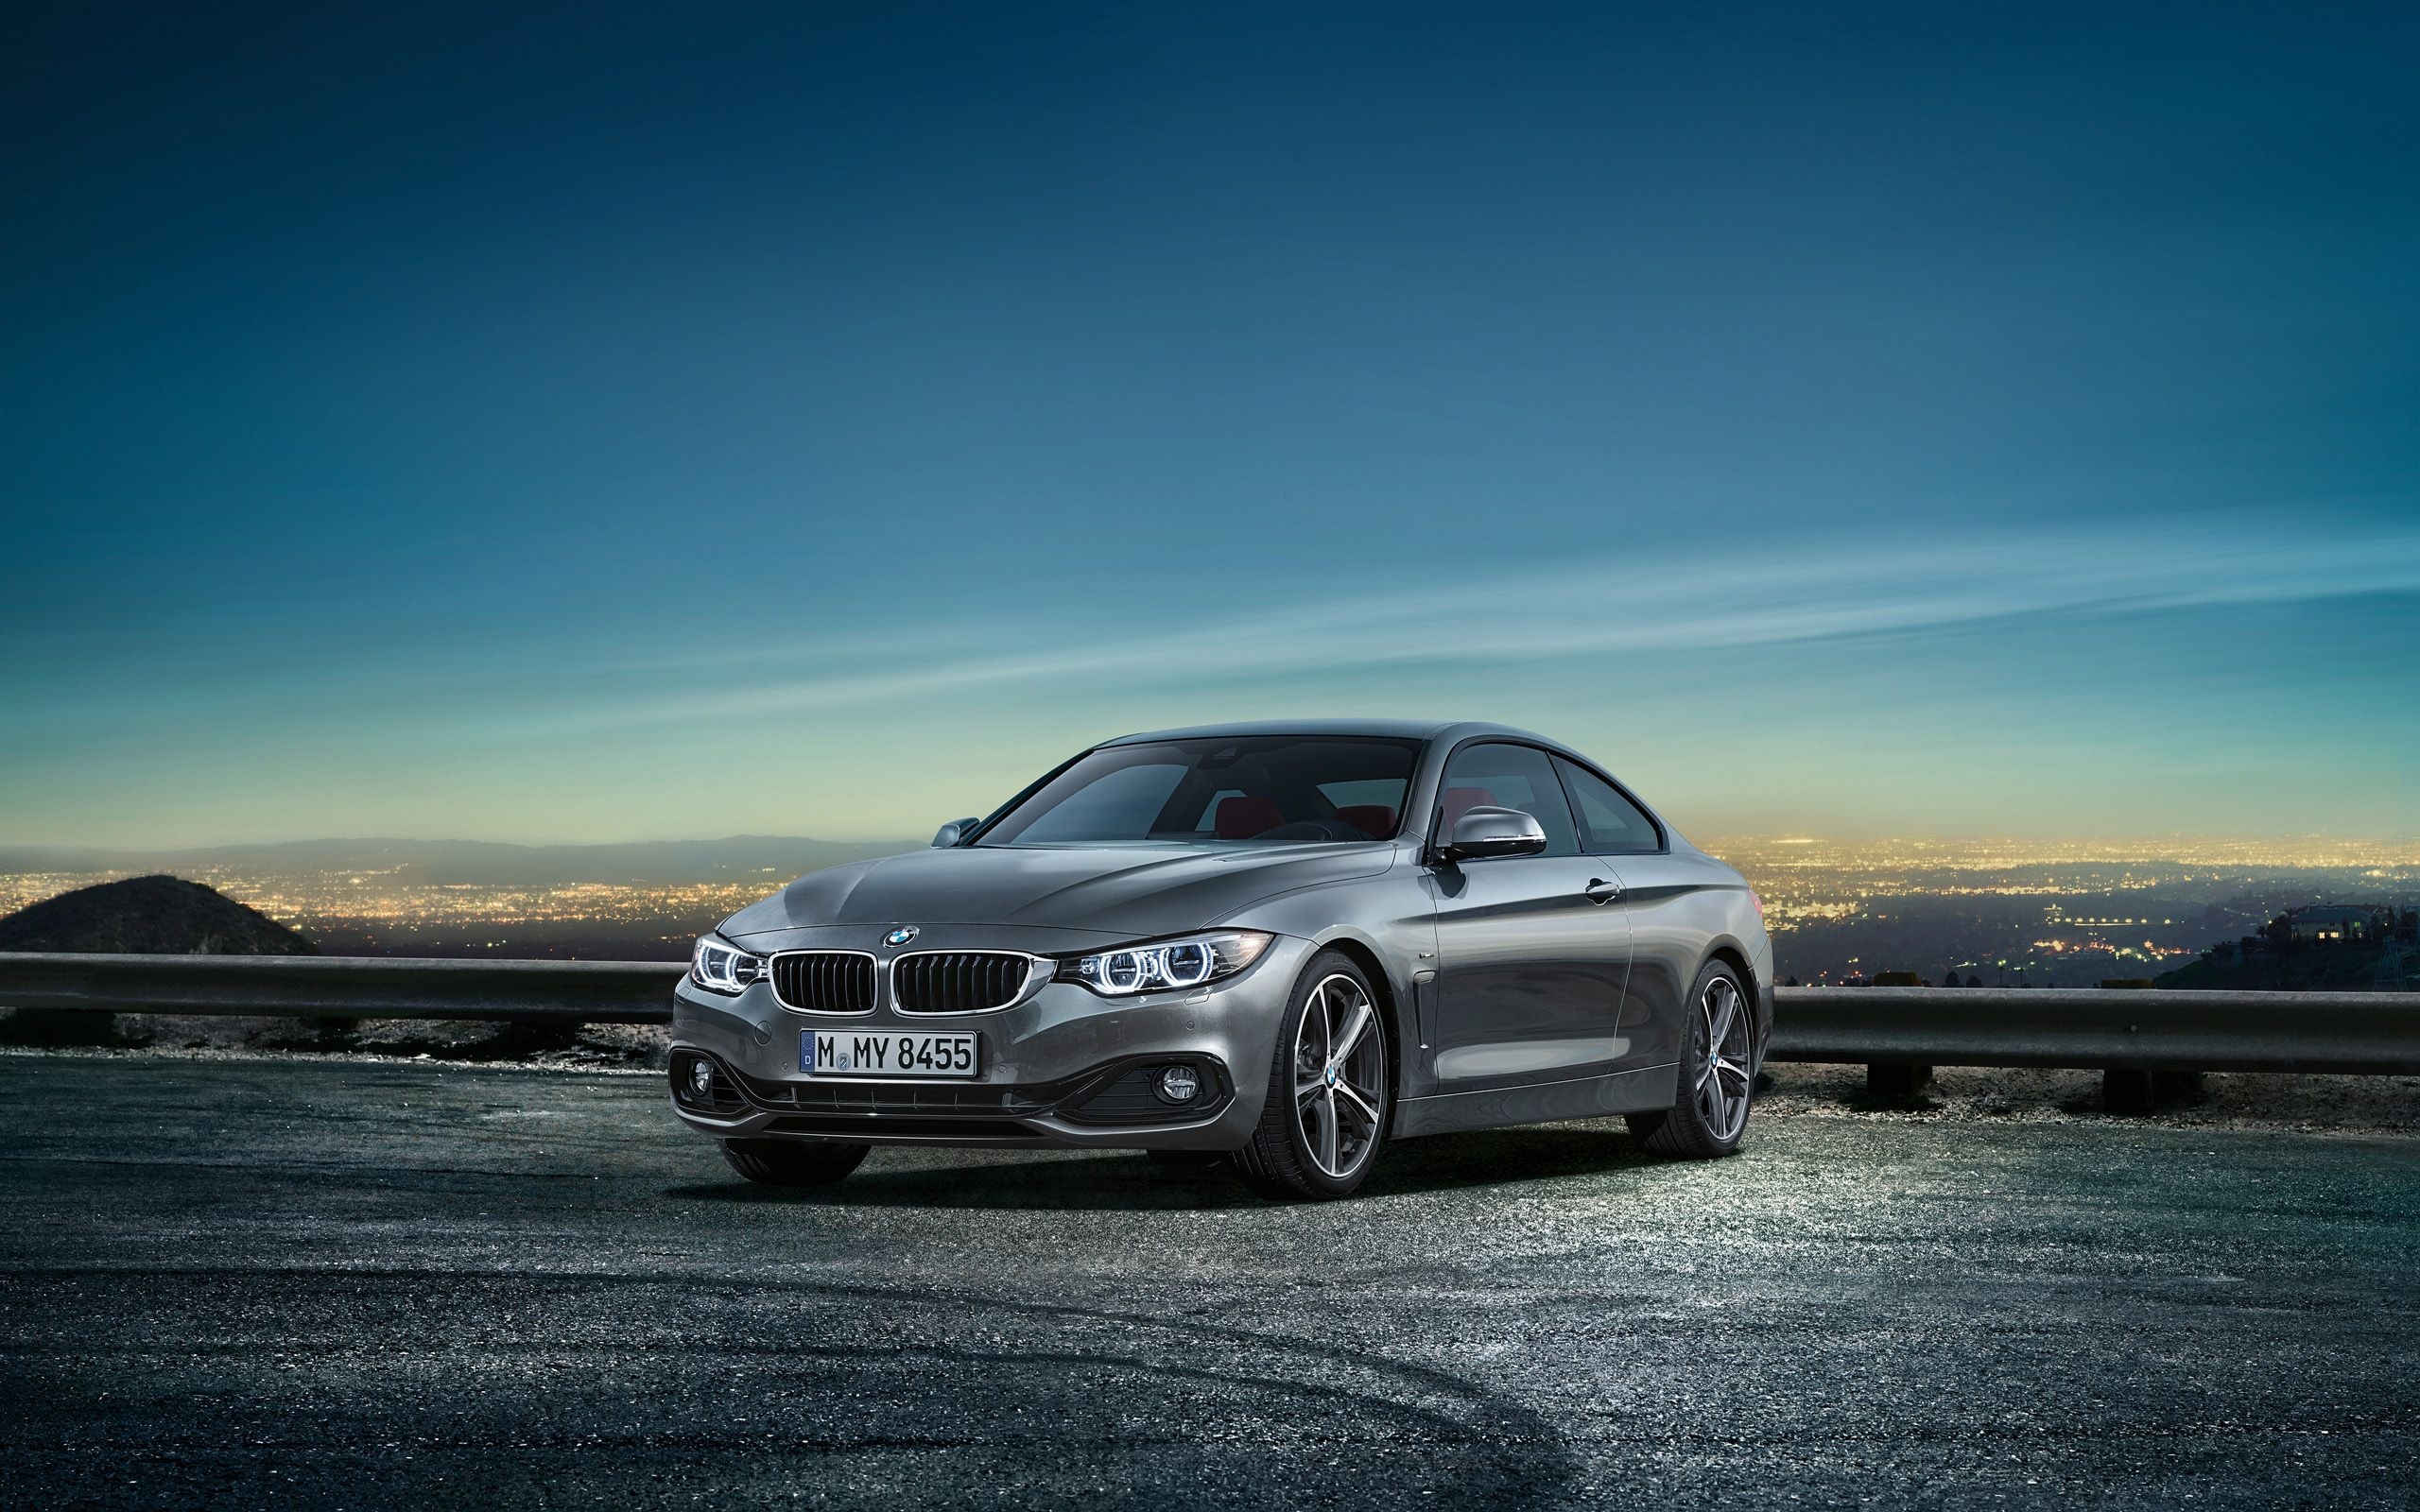 BMW 4 Series, Stunning wallpapers, Exhilarating performance, Ultimate driving experience, 2560x1600 HD Desktop